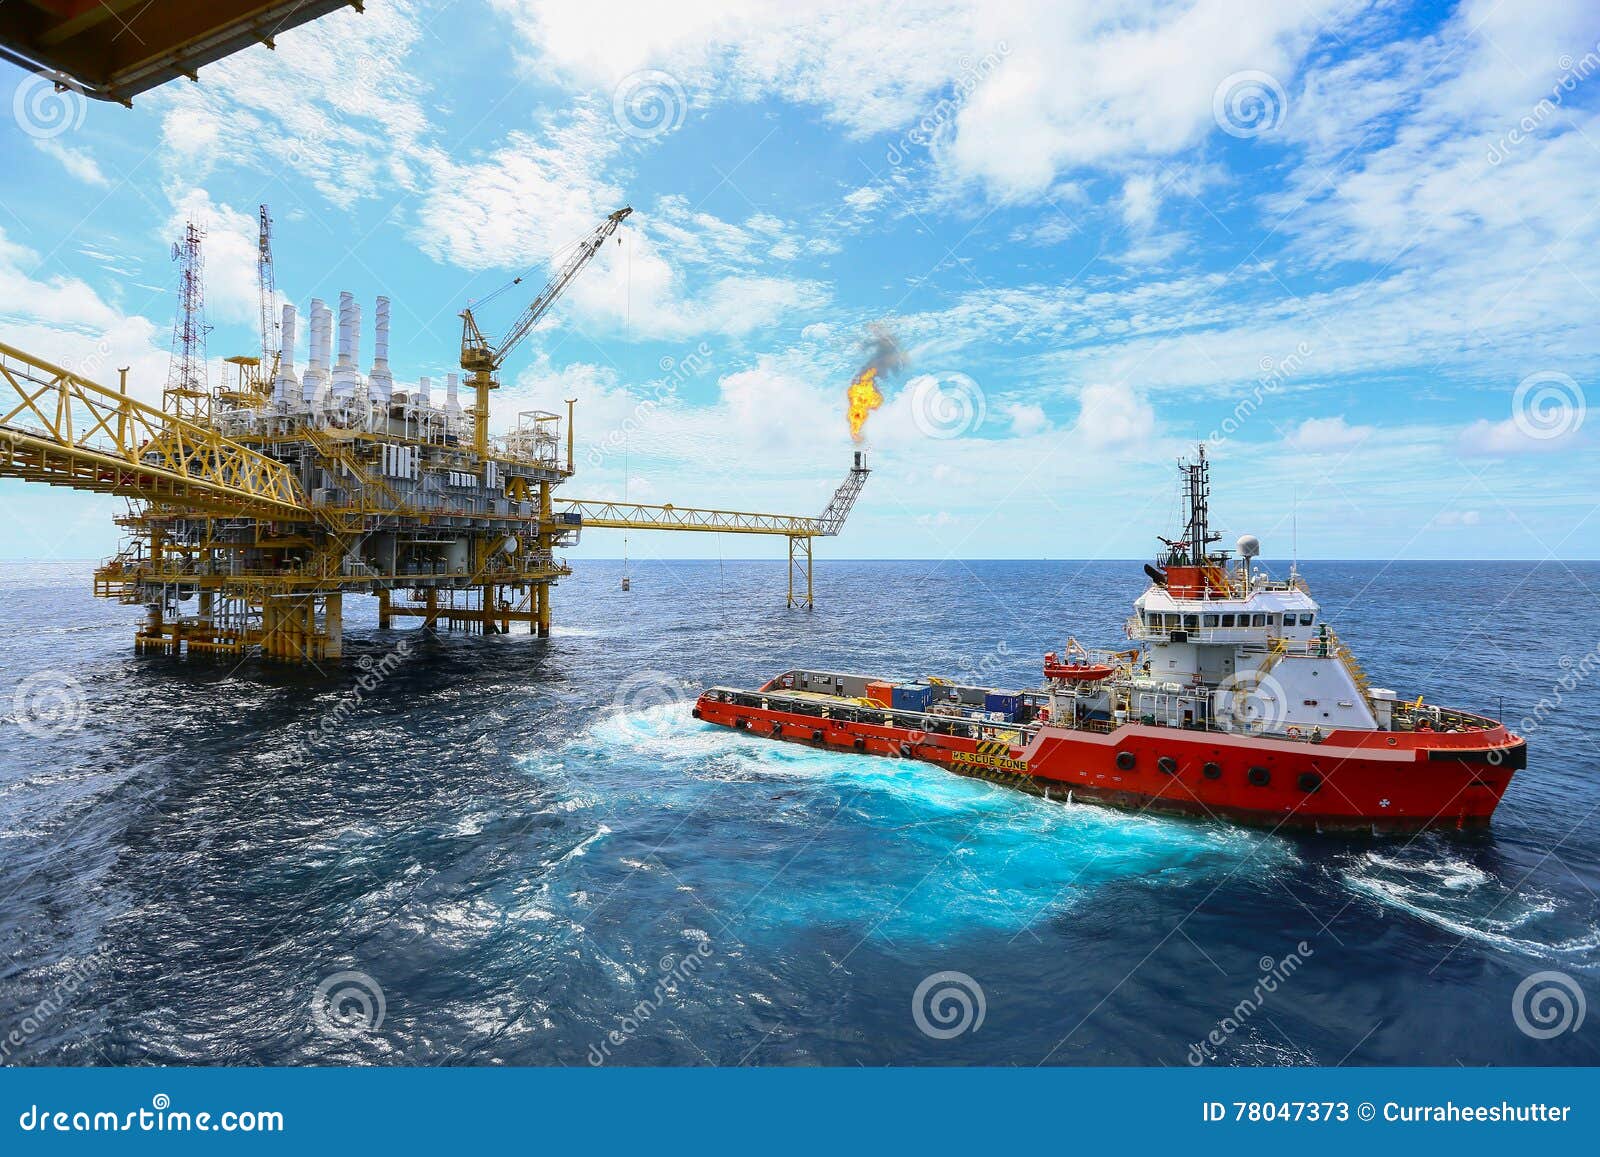 offshore construction platform for production oil and gas, oil and gas industry and hard work,production platform and operation